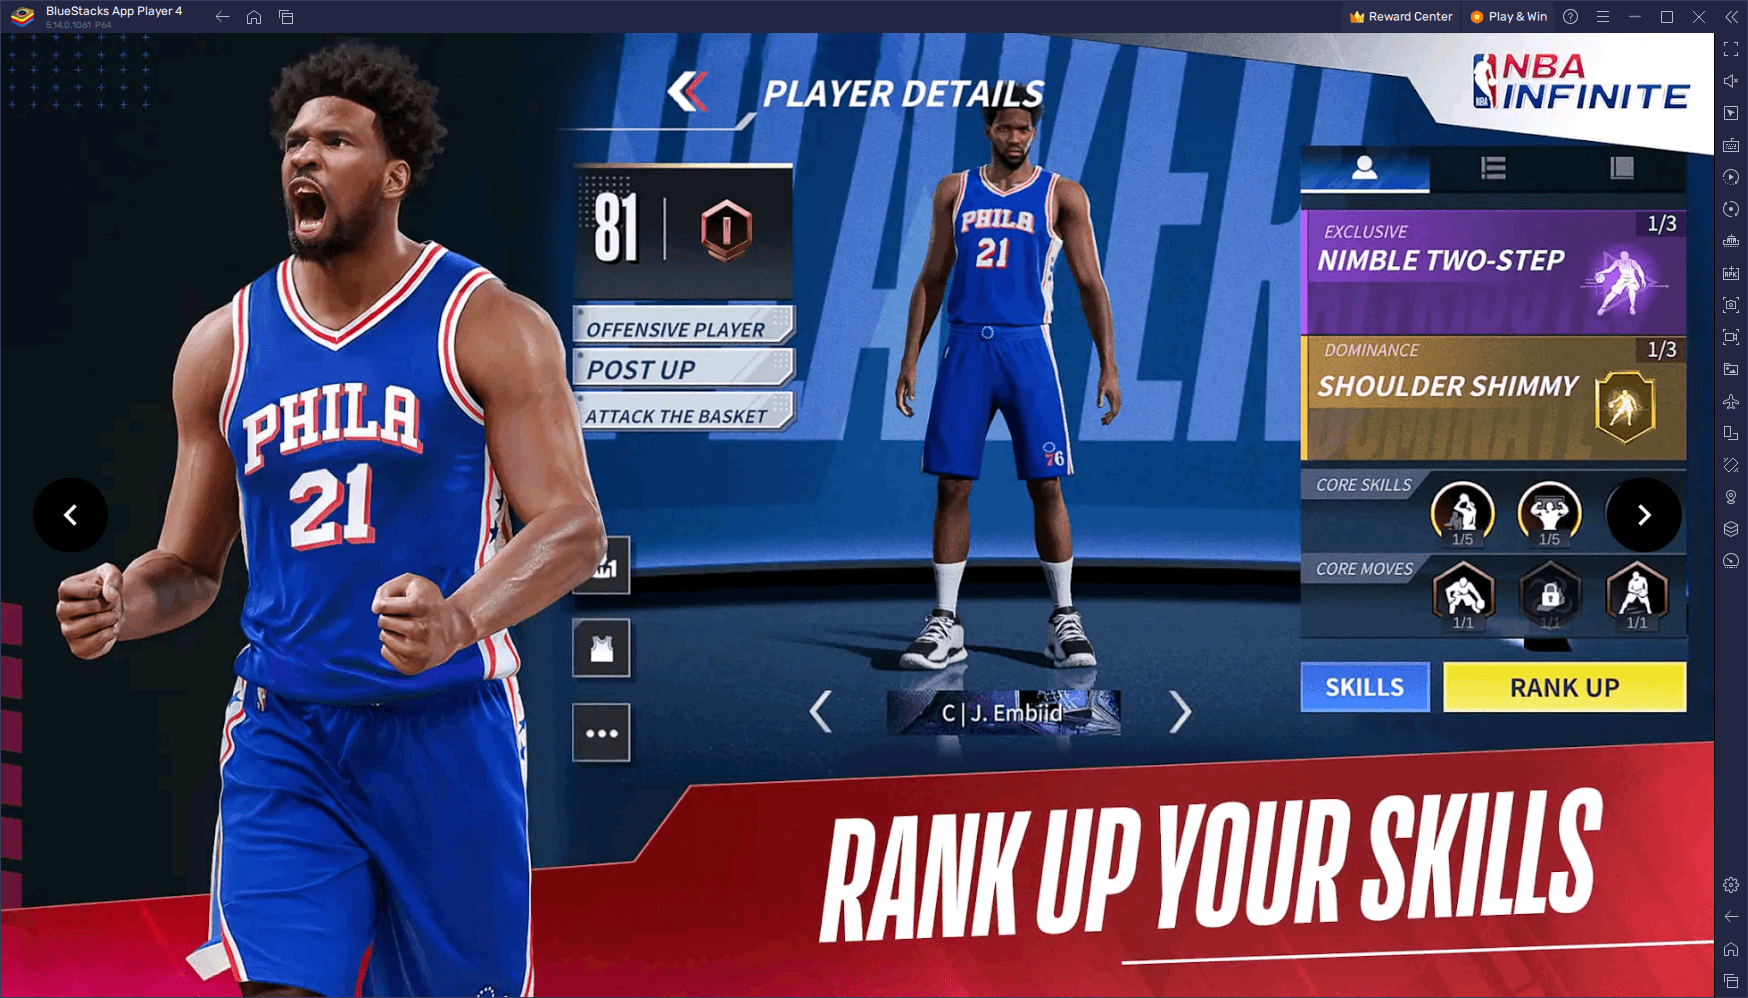 NBA Infinite on PC – Pre-Registrations Open for This Upcoming Basketball Mobile Game